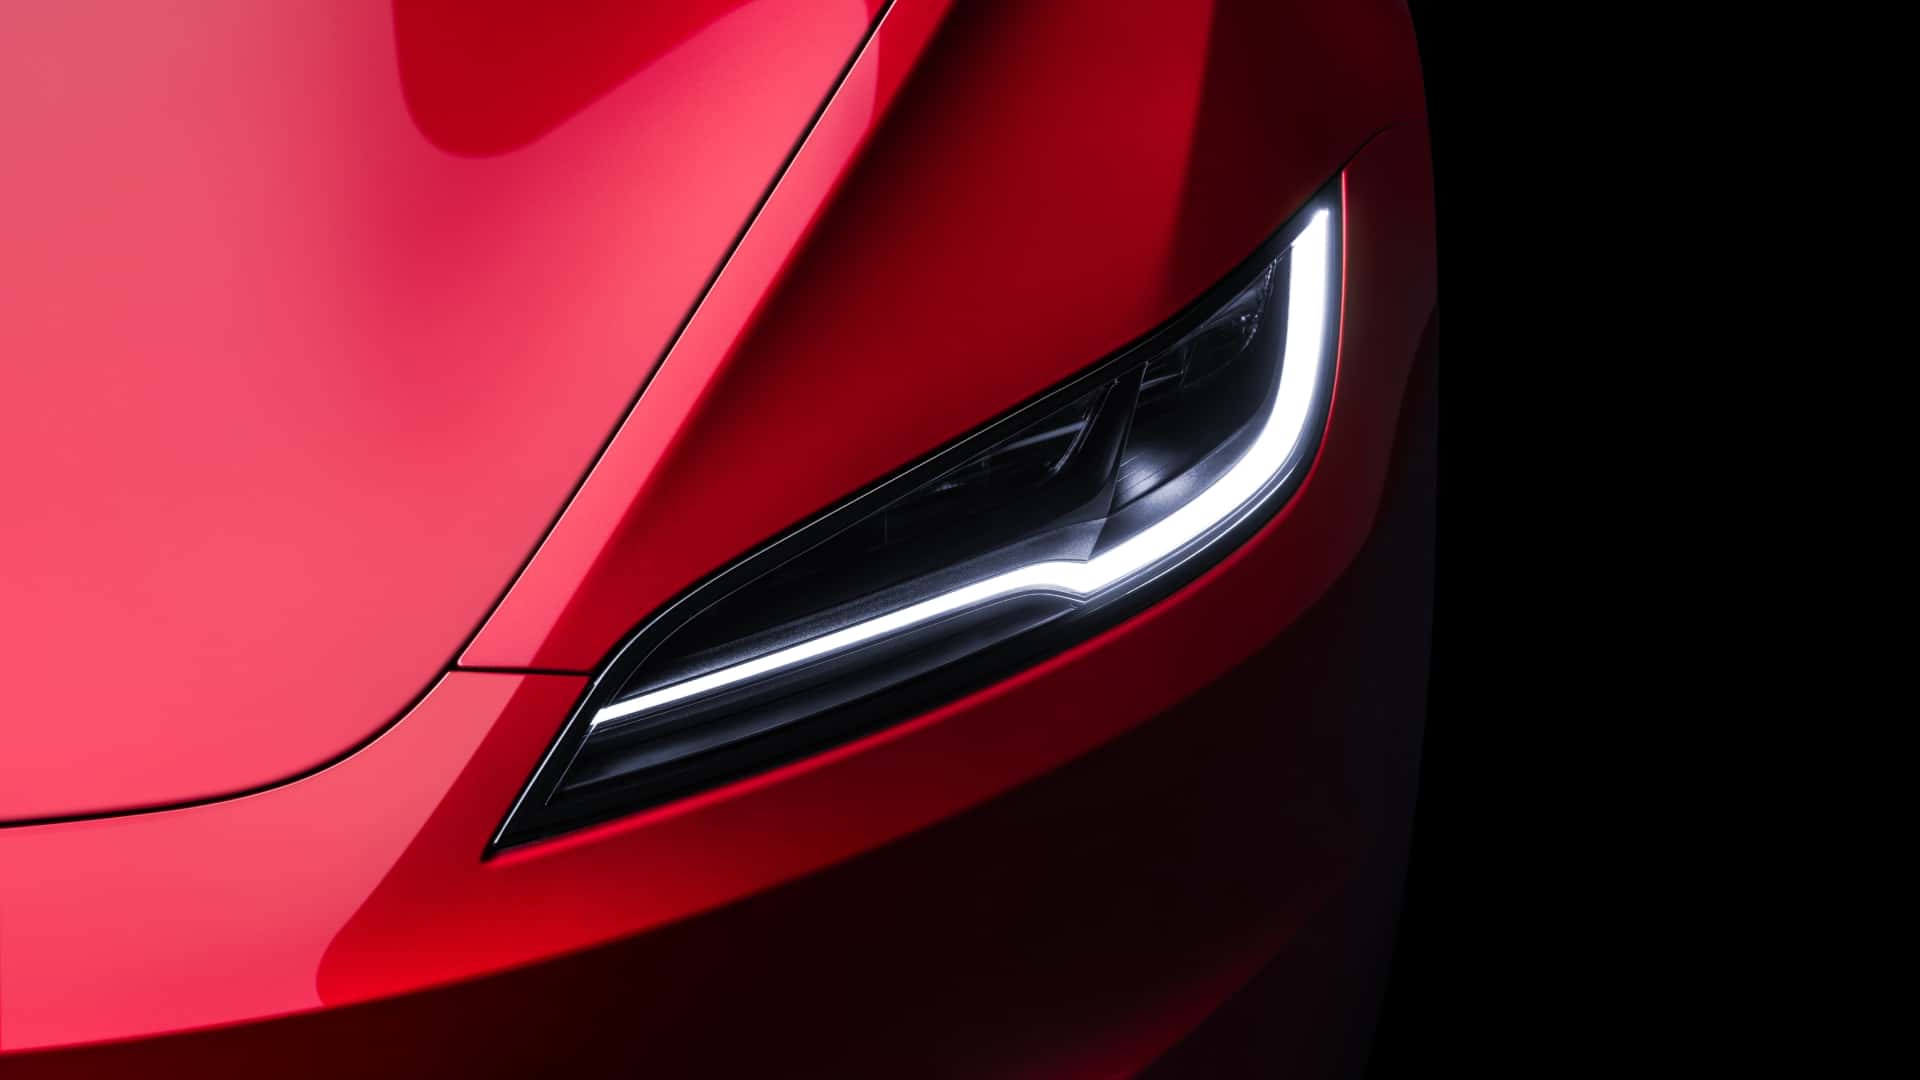 tesla model 3 facelift bows at french owners club event, us debut to follow?